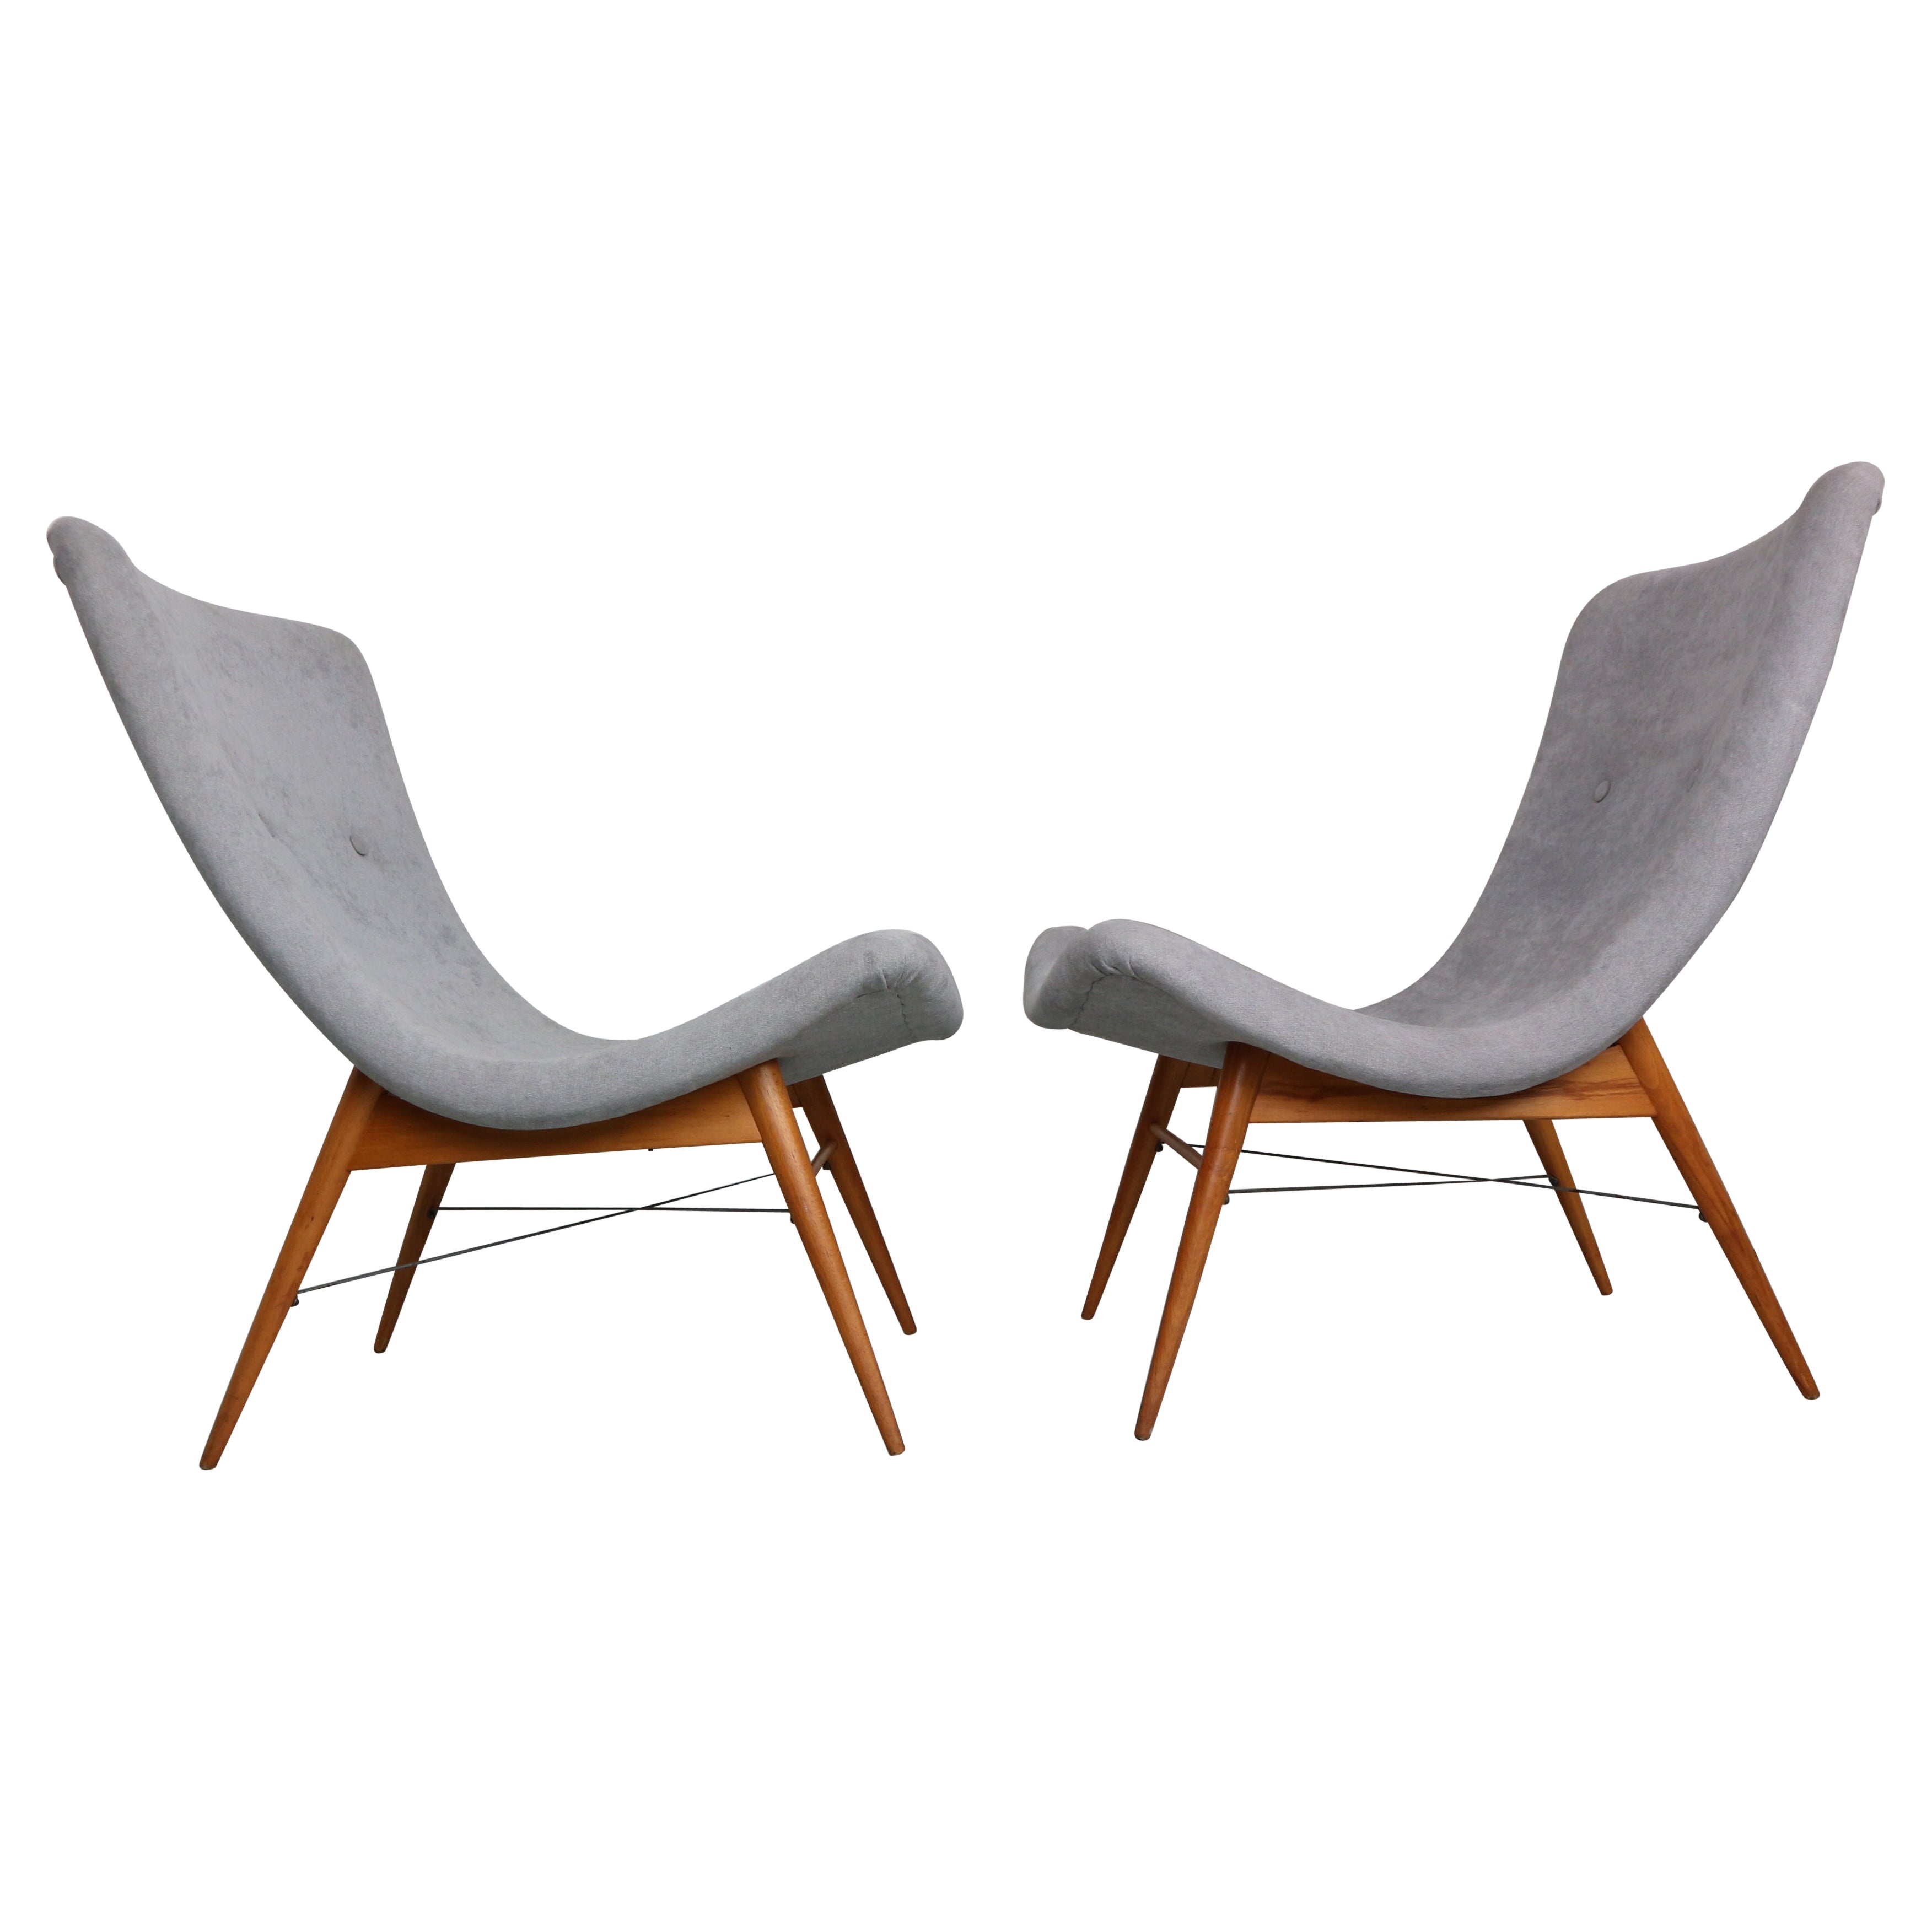 Two Lounge Chairs by Miroslav Navratil, Newly upholstered, 1959s